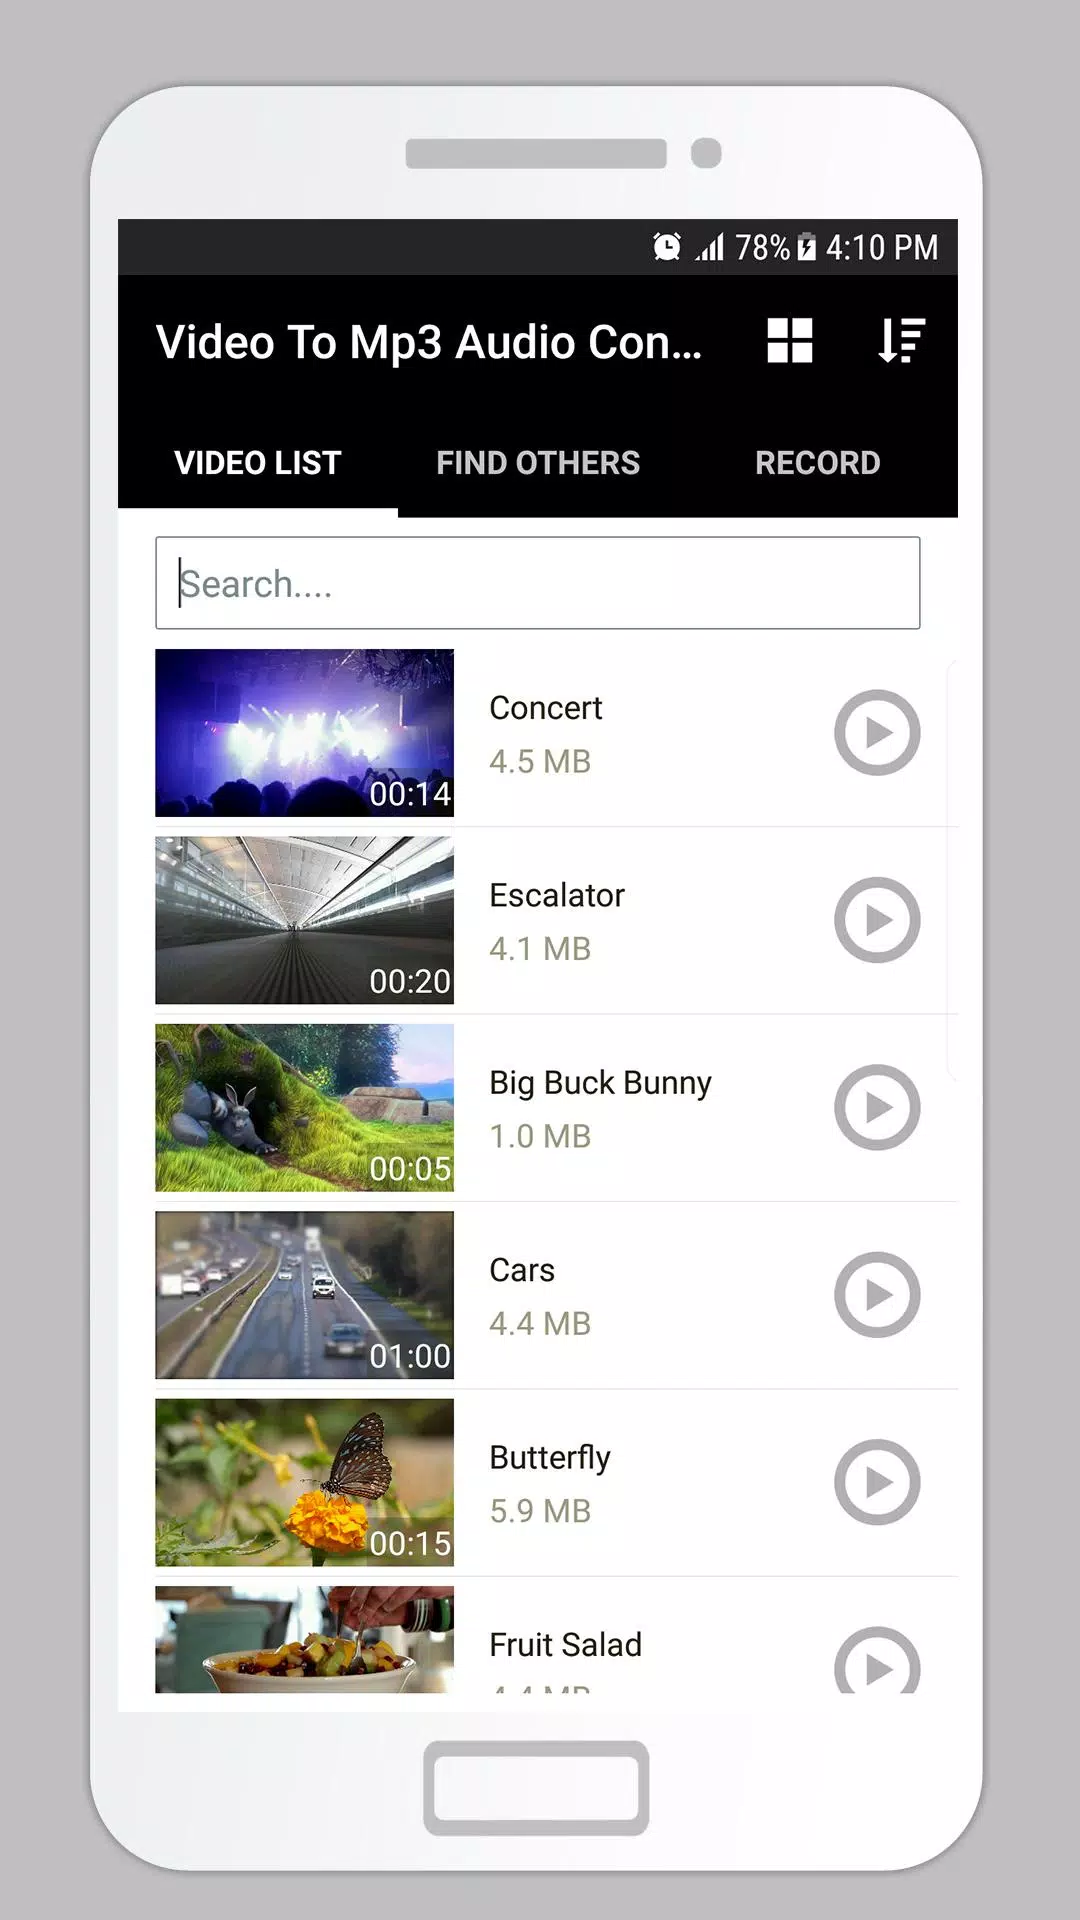 Video To Mp3 Audio Converter for Android - APK Download